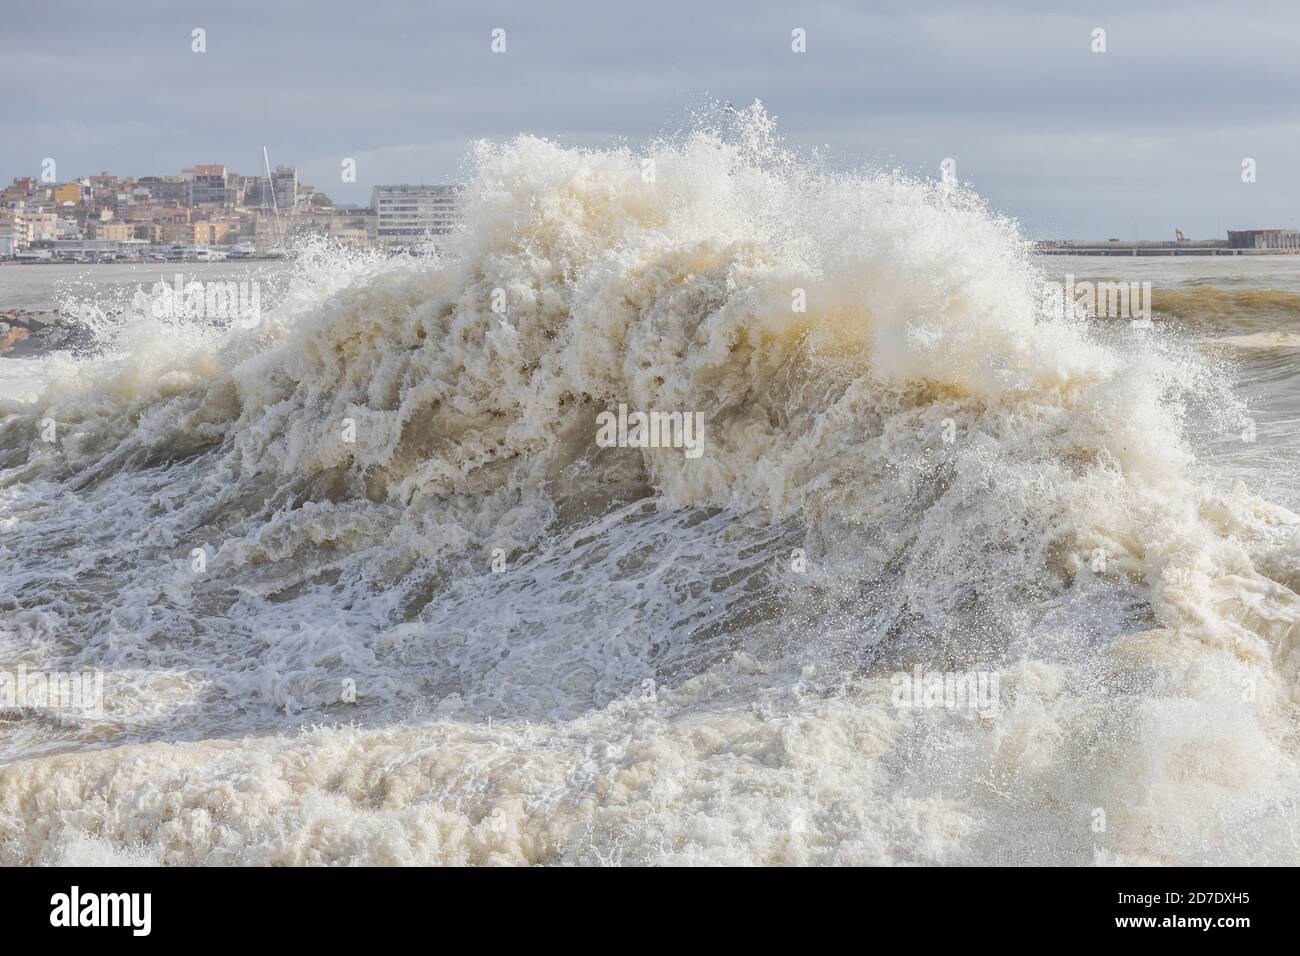 Powerful ocean wave breaking ina windy day in Spanish town Palamos in Costa Brava. Selective focus. Stock Photo